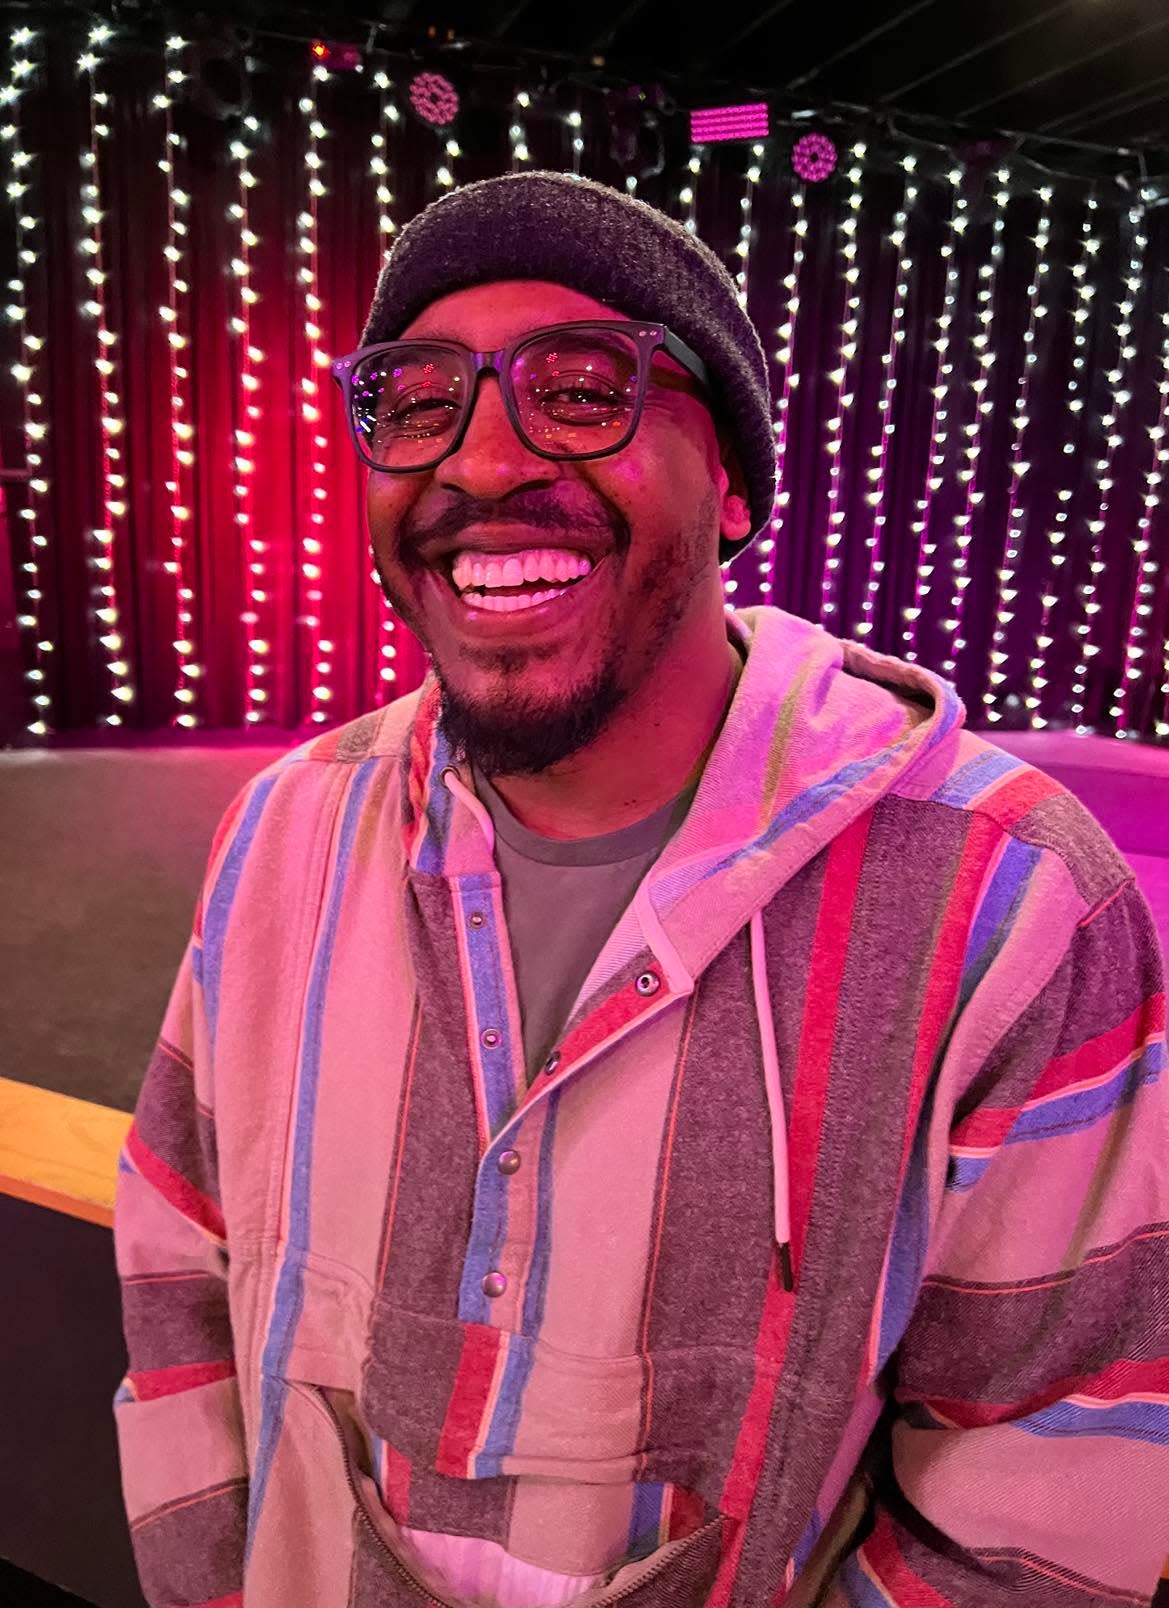 Jéan P the MC is a Canton-based rapper who also works for the U.S. Postal Service. The hip-hop artist will perform with four members of the Canton Symphony Orchestra on Thursday at The Auricle.